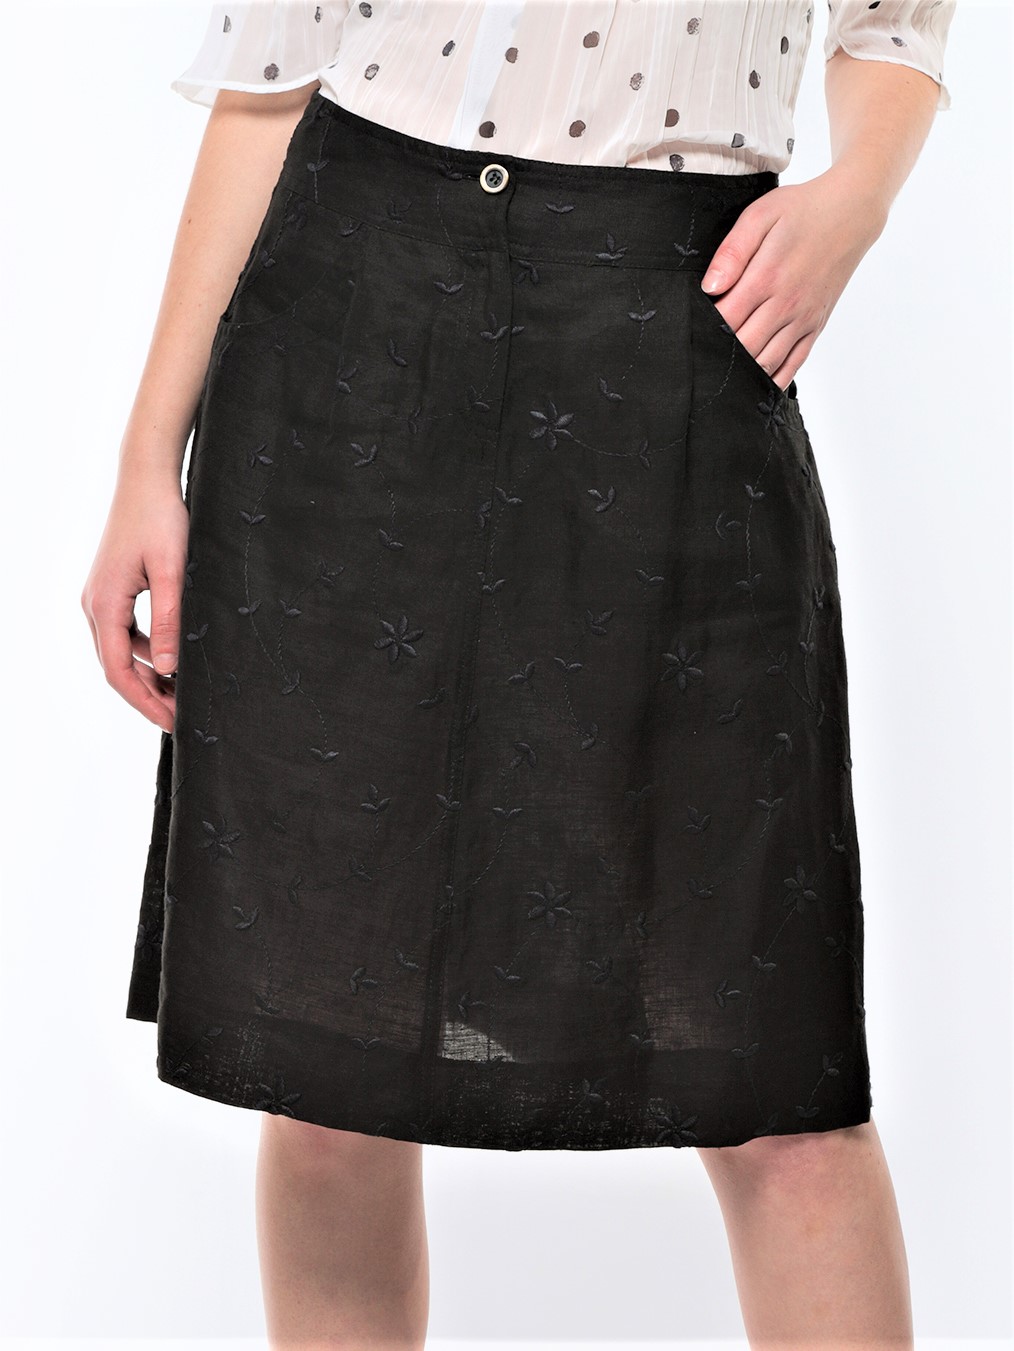 Summer skirt midi trapeze in black embroidered linen